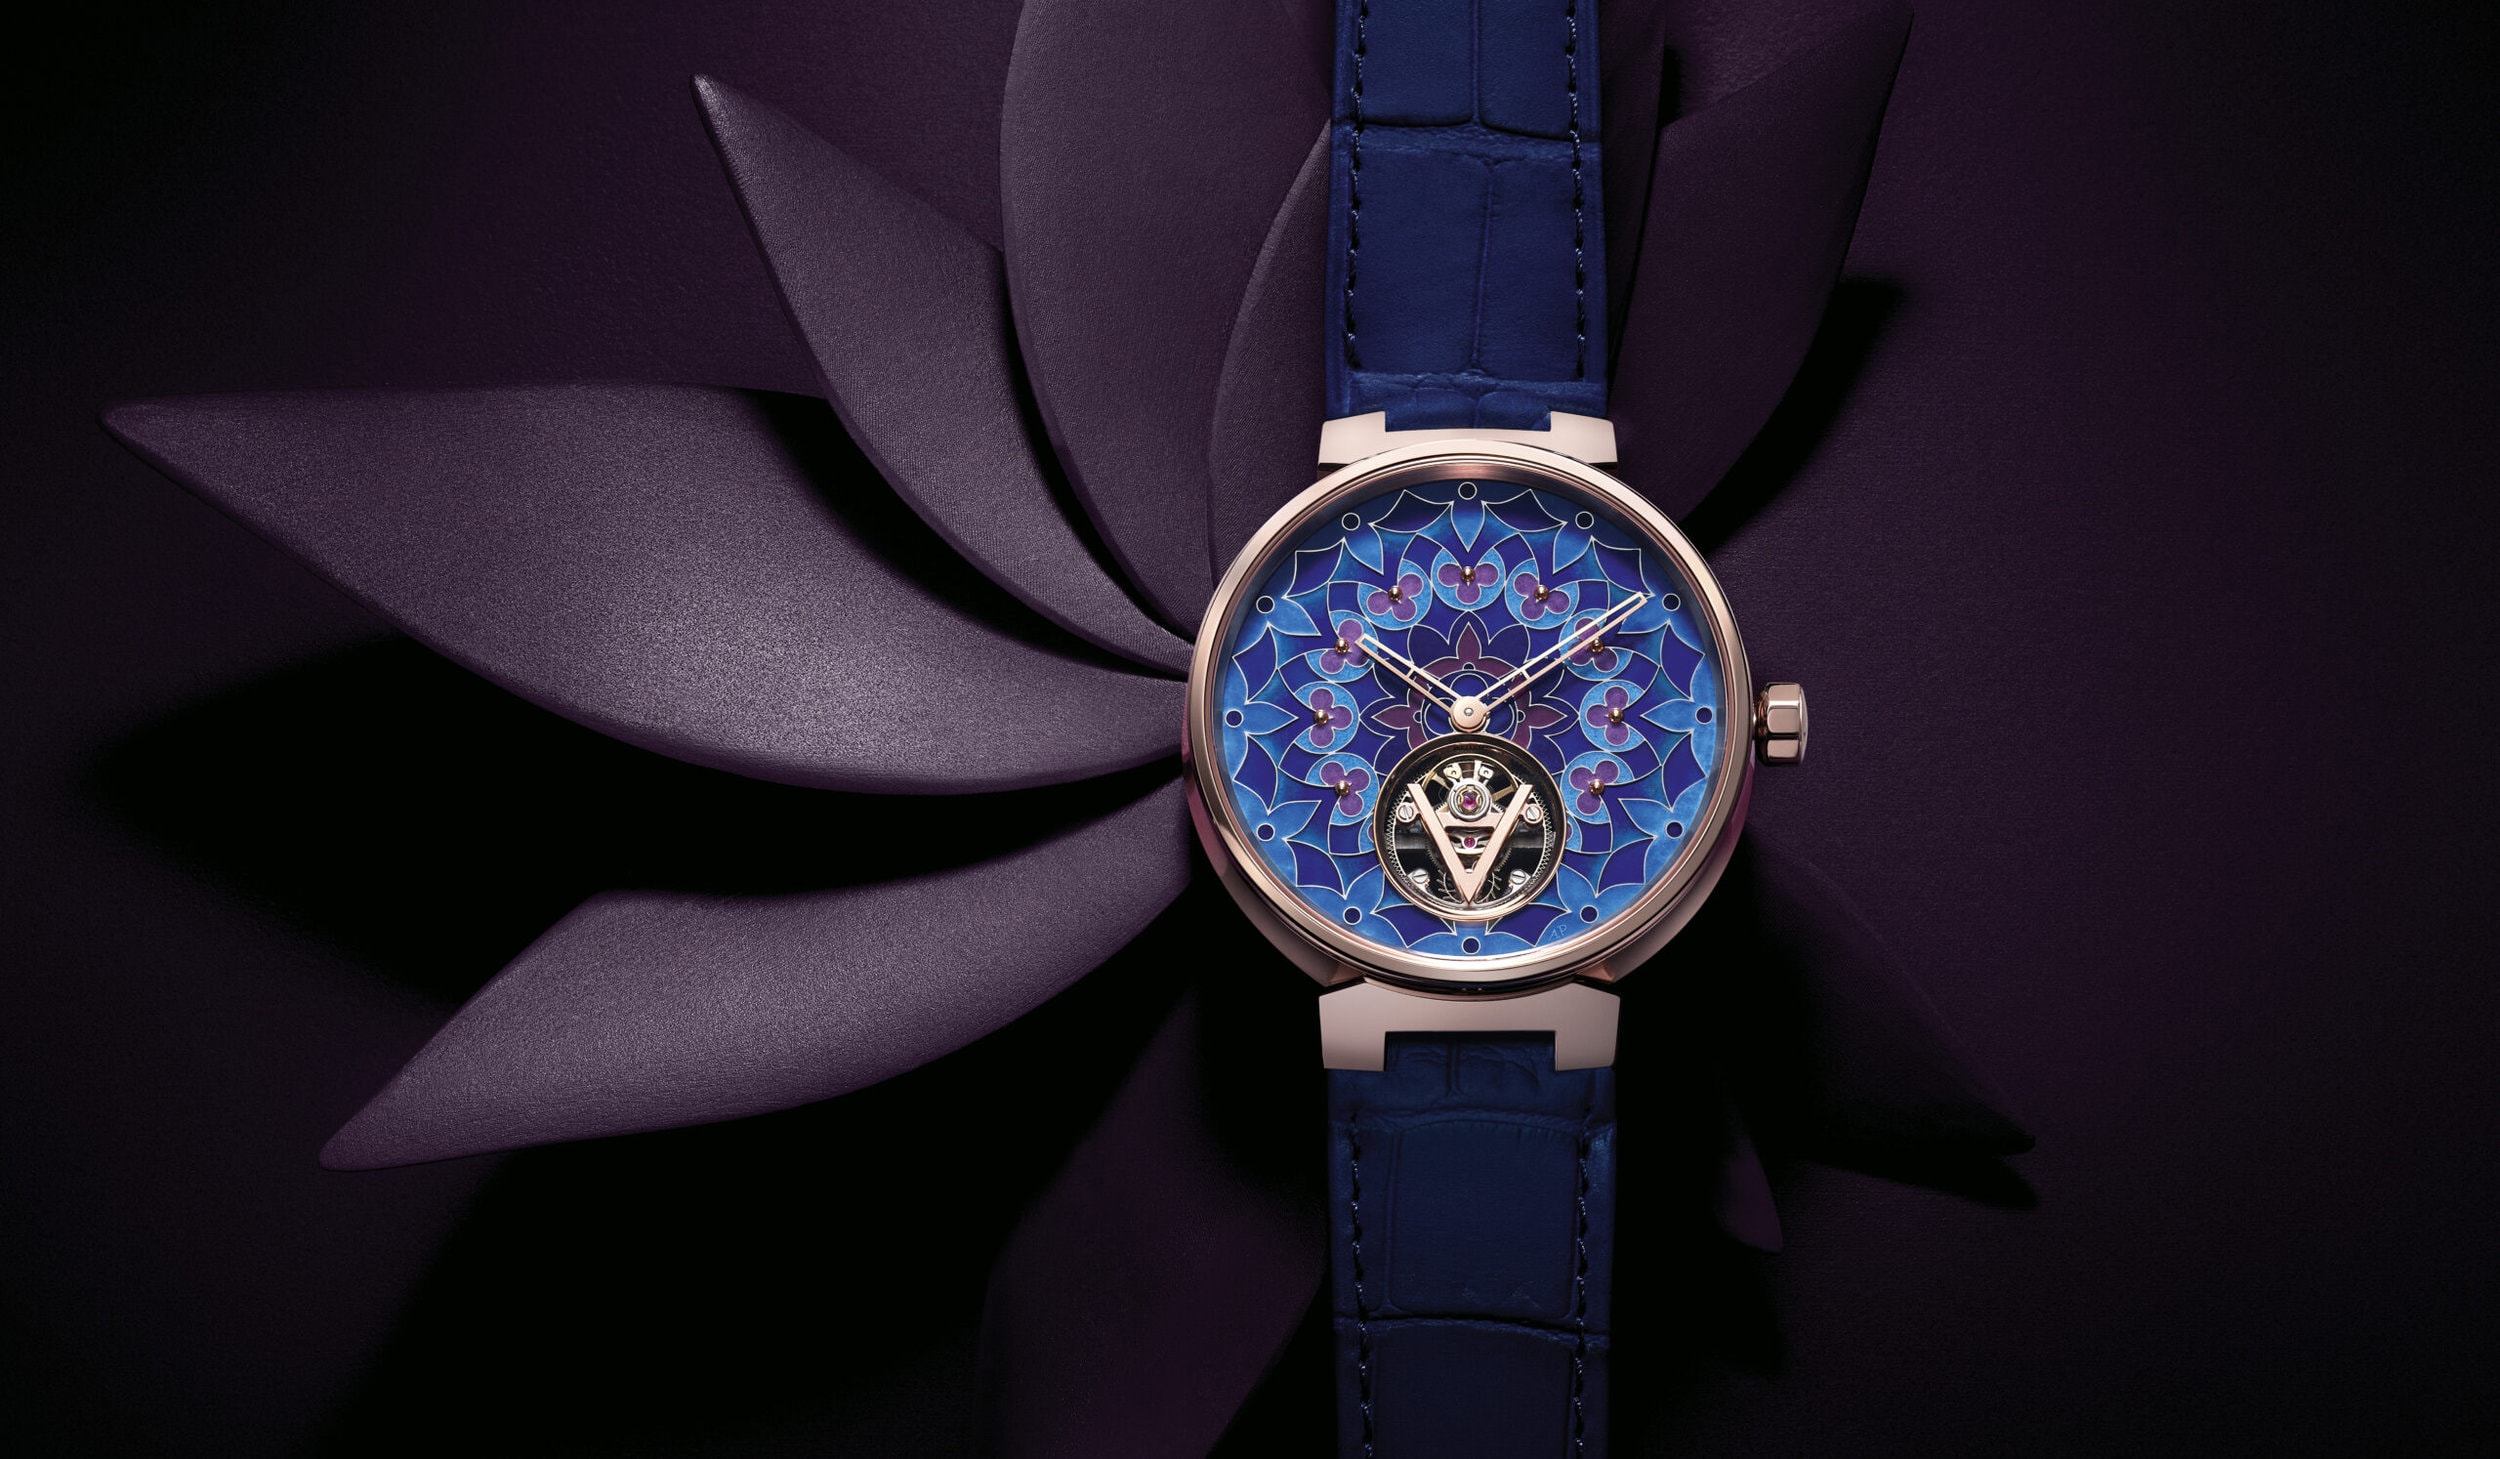 Louis Vuitton dials up luxury with golden Tambour watches